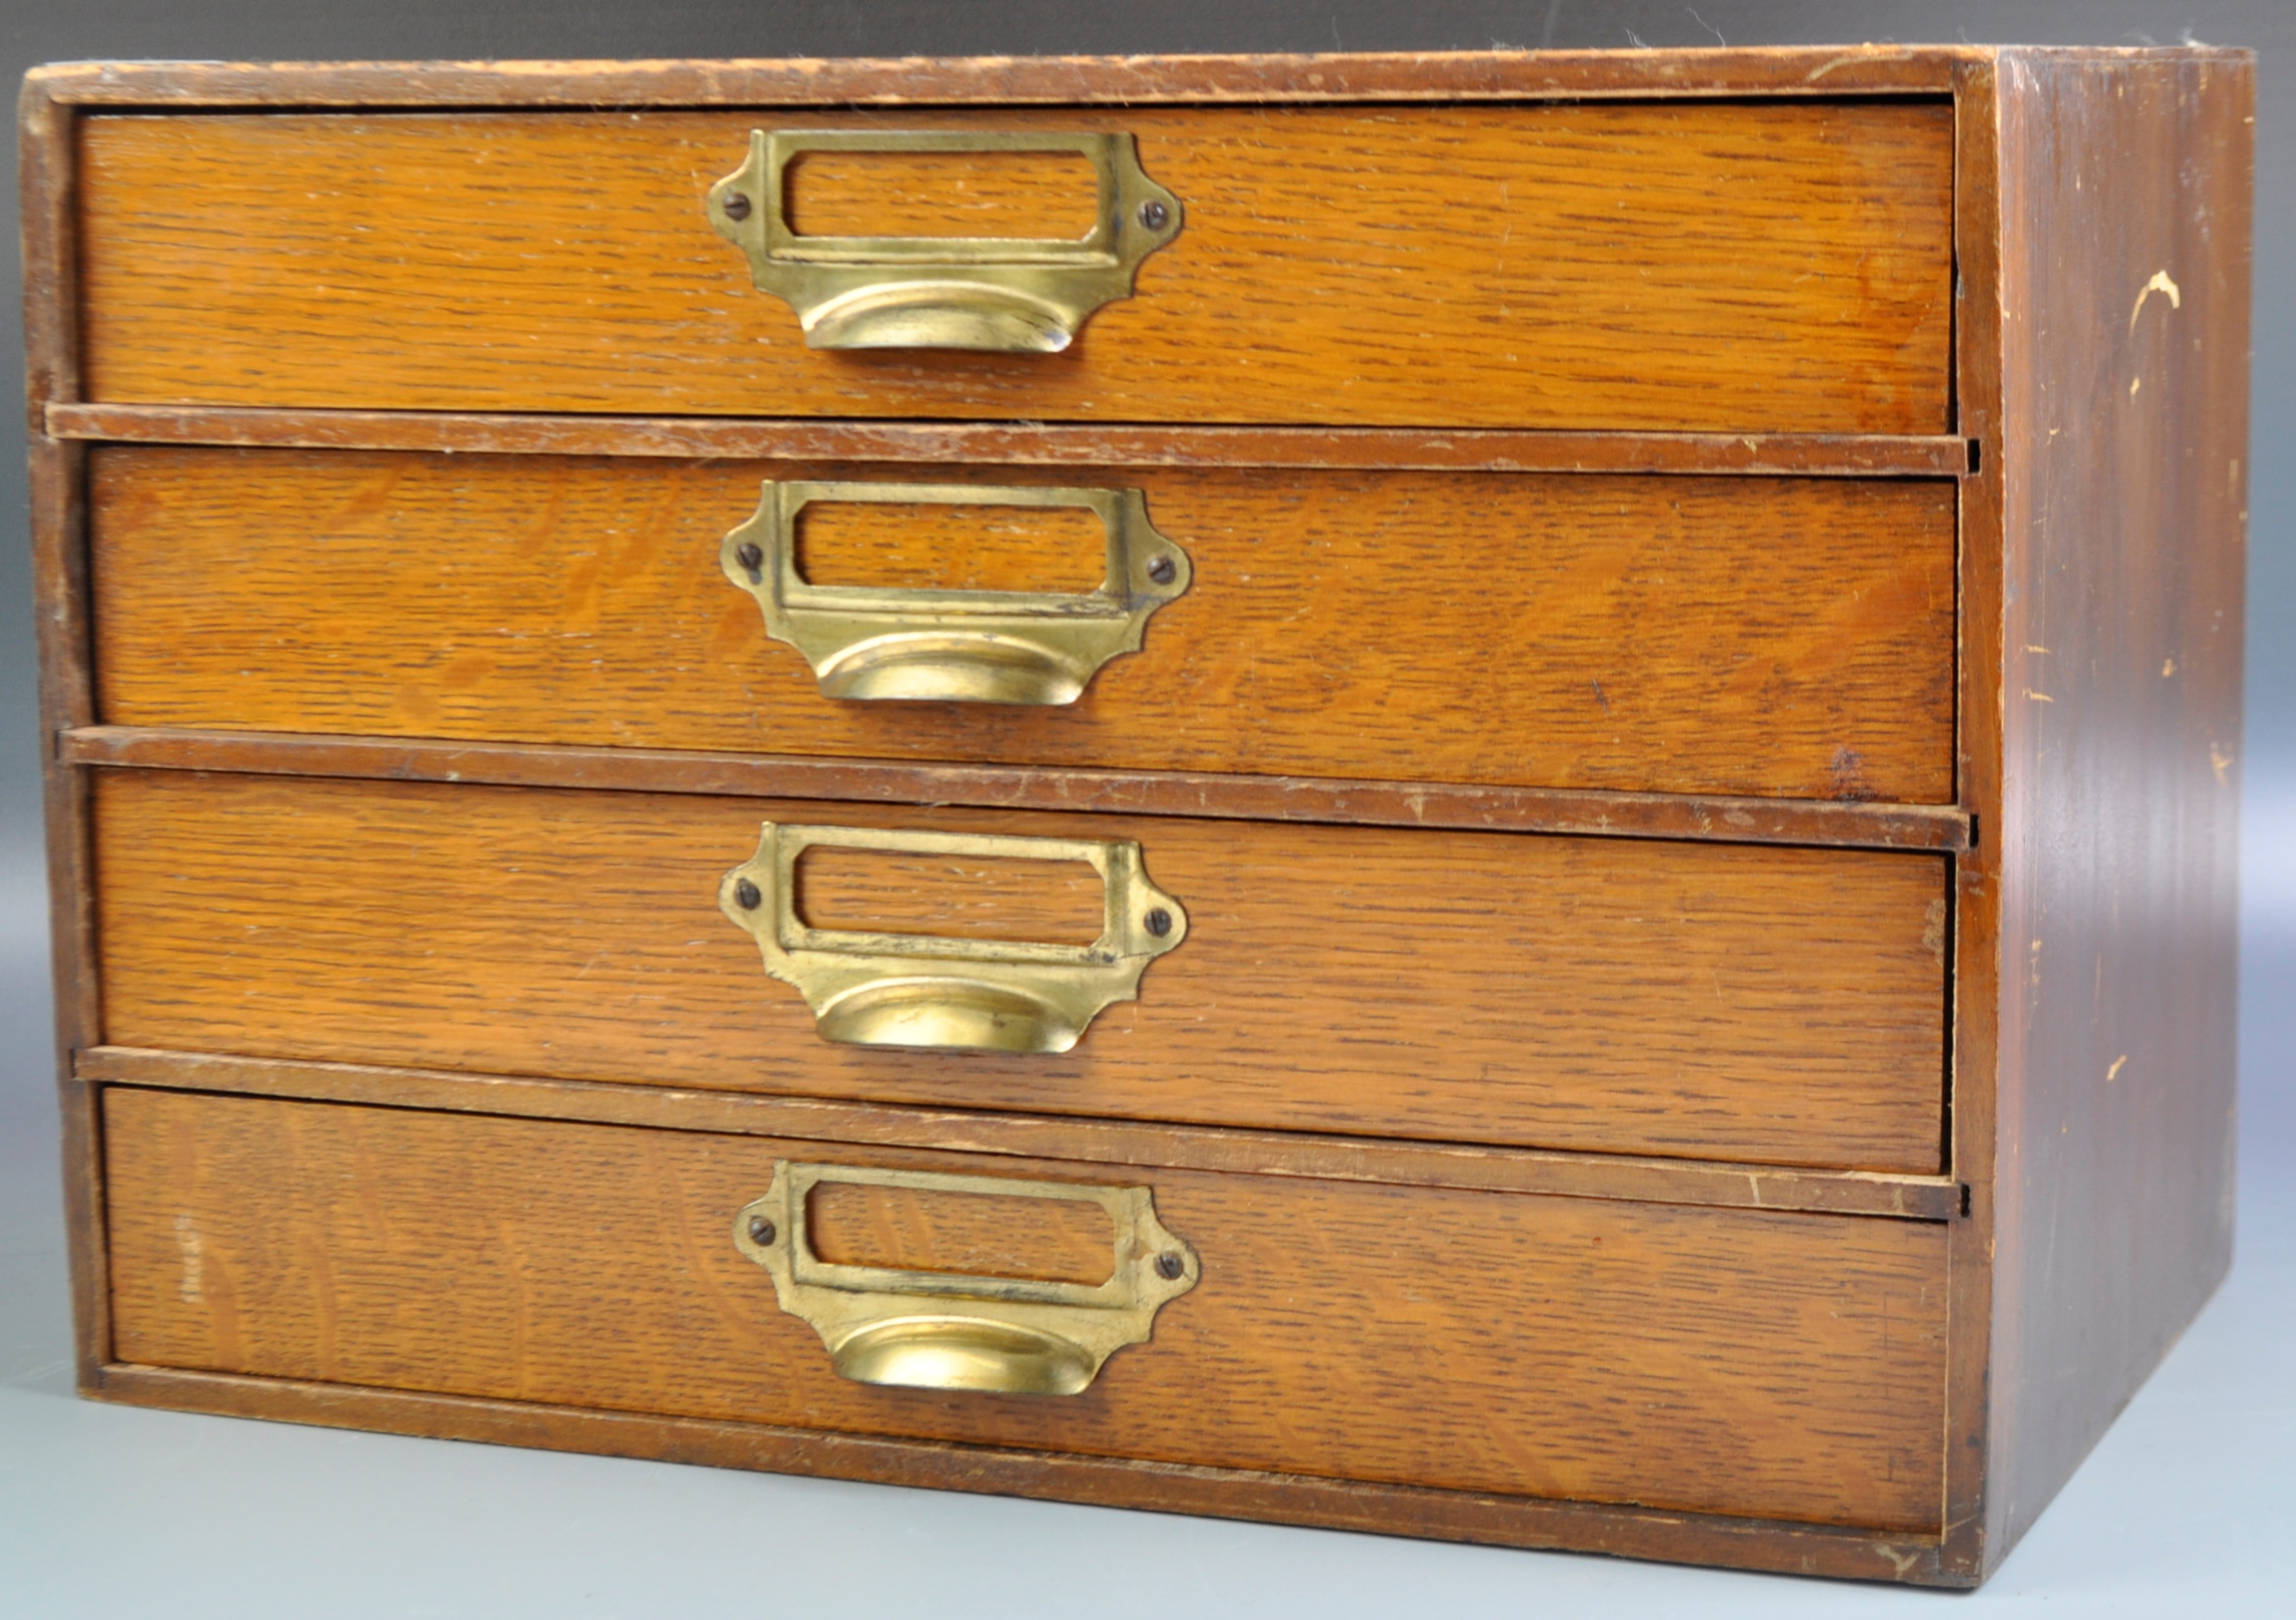 EARLY 20TH CENTURY OAK DESKTOP FILLING CABINET / CHEST OF DRAWERS